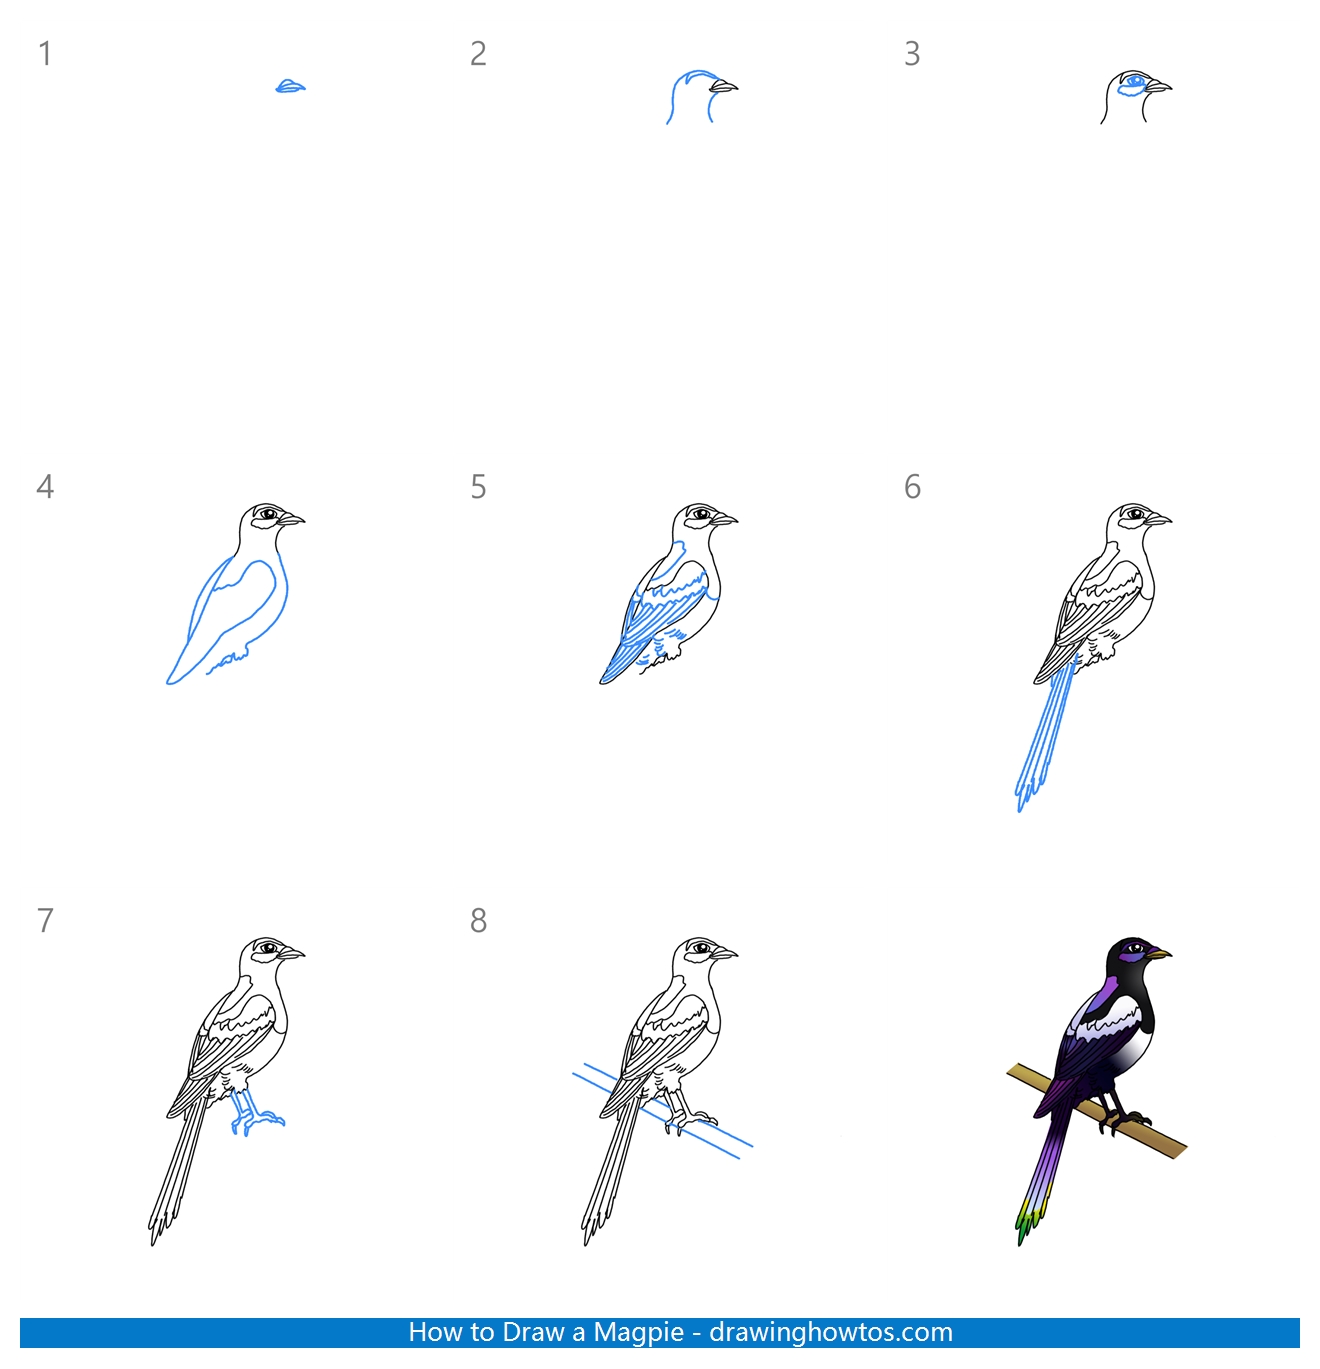 How to Draw a Magpie Step by Step